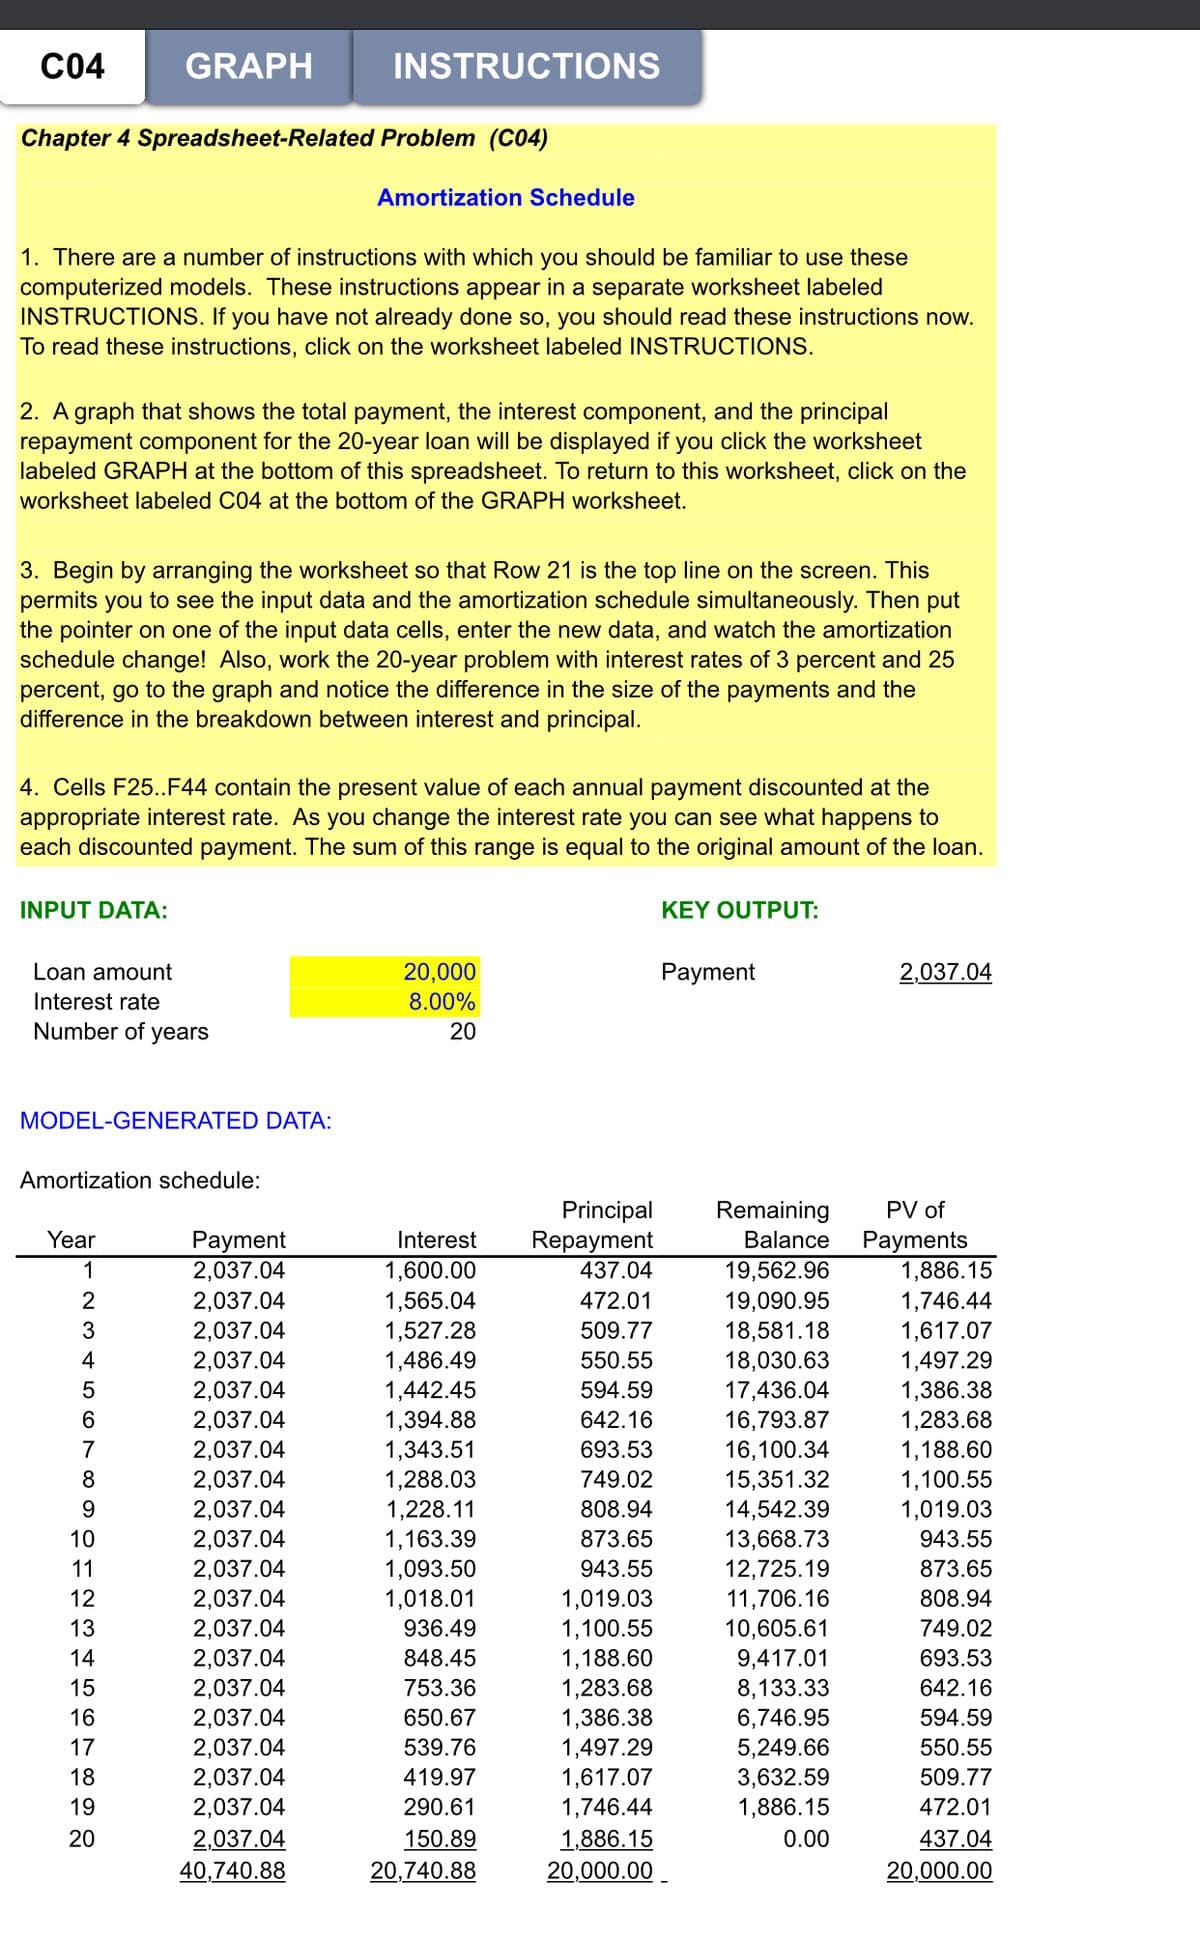 C04
GRAPH
INSTRUCTIONS
Chapter 4 Spreadsheet-Related Problem (C04)
Amortization Schedule
1. There are a number of instructions with which you should be familiar to use these
computerized models. These instructions appear in a separate worksheet labeled
INSTRUCTIONS. If you have not already done so, you should read these instructions now.
To read these instructions, click on the worksheet labeled INSTRUCTIONS.
2. A graph that shows the total payment, the interest component, and the principal
repayment component for the 20-year loan will be displayed if you click the worksheet
labeled GRAPH at the bottom of this spreadsheet. To return to this worksheet, click on the
worksheet labeled C04 at the bottom of the GRAPH worksheet.
3. Begin by arranging the worksheet so that Row 21 is the top line on the screen. This
permits you to see the input data and the amortization schedule simultaneously. Then put
the pointer on one of the input data cells, enter the new data, and watch the amortization
schedule change! Also, work the 20-year problem with interest rates of 3 percent and 25
percent, go to the graph and notice the difference in the size of the payments and the
difference in the breakdown between interest and principal.
4. Cells F25.F44 contain the present value of each annual payment discounted at the
appropriate interest rate. As you change the interest rate you can see what happens to
each discounted payment. The sum of this range is equal to the original amount of the loan.
INPUT DATA:
ΚΕY OUTPUT:
Loan amount
20,000
Payment
2,037.04
Interest rate
8.00%
Number of years
20
MODEL-GENERATED DATA:
Amortization schedule:
Remaining
Balance
Principal
PV of
Year
Рayment
2,037.04
2,037.04
2,037.04
2,037.04
2,037.04
2,037.04
2,037.04
2,037.04
2,037.04
2,037.04
2,037.04
2,037.04
2,037.04
2,037.04
2,037.04
2,037.04
2,037.04
2,037.04
2,037.04
Interest
Repayment
437.04
Рayments
1,886.15
1
1,600.00
1,565.04
1,527.28
1,486.49
1,442.45
1,394.88
1,343.51
1,288.03
19,562.96
19,090.95
18,581.18
18,030.63
17,436.04
16,793.87
16,100.34
15,351.32
14,542.39
13,668.73
12,725.19
11,706.16
10,605.61
9,417.01
8,133.33
472.01
1,746.44
1,617.07
3
509.77
4
550.55
1,497.29
1,386.38
1,283.68
1,188.60
1,100.55
1,019.03
594.59
642.16
7
693.53
8
749.02
1,228.11
1,163.39
1,093.50
1,018.01
808.94
10
873.65
943.55
11
943.55
873.65
1,019.03
1,100.55
1,188.60
1,283.68
1,386.38
1,497.29
1,617.07
1,746.44
12
808.94
13
936.49
749.02
14
848.45
693.53
15
753.36
642.16
16
650.67
6,746.95
594.59
5,249.66
3,632.59
1,886.15
17
539.76
550.55
18
419.97
509.77
19
290.61
472.01
0.00
1,886.15
20,000.00 -
20
2,037.04
40,740.88
150.89
437.04
20,000.00
20,740.88
